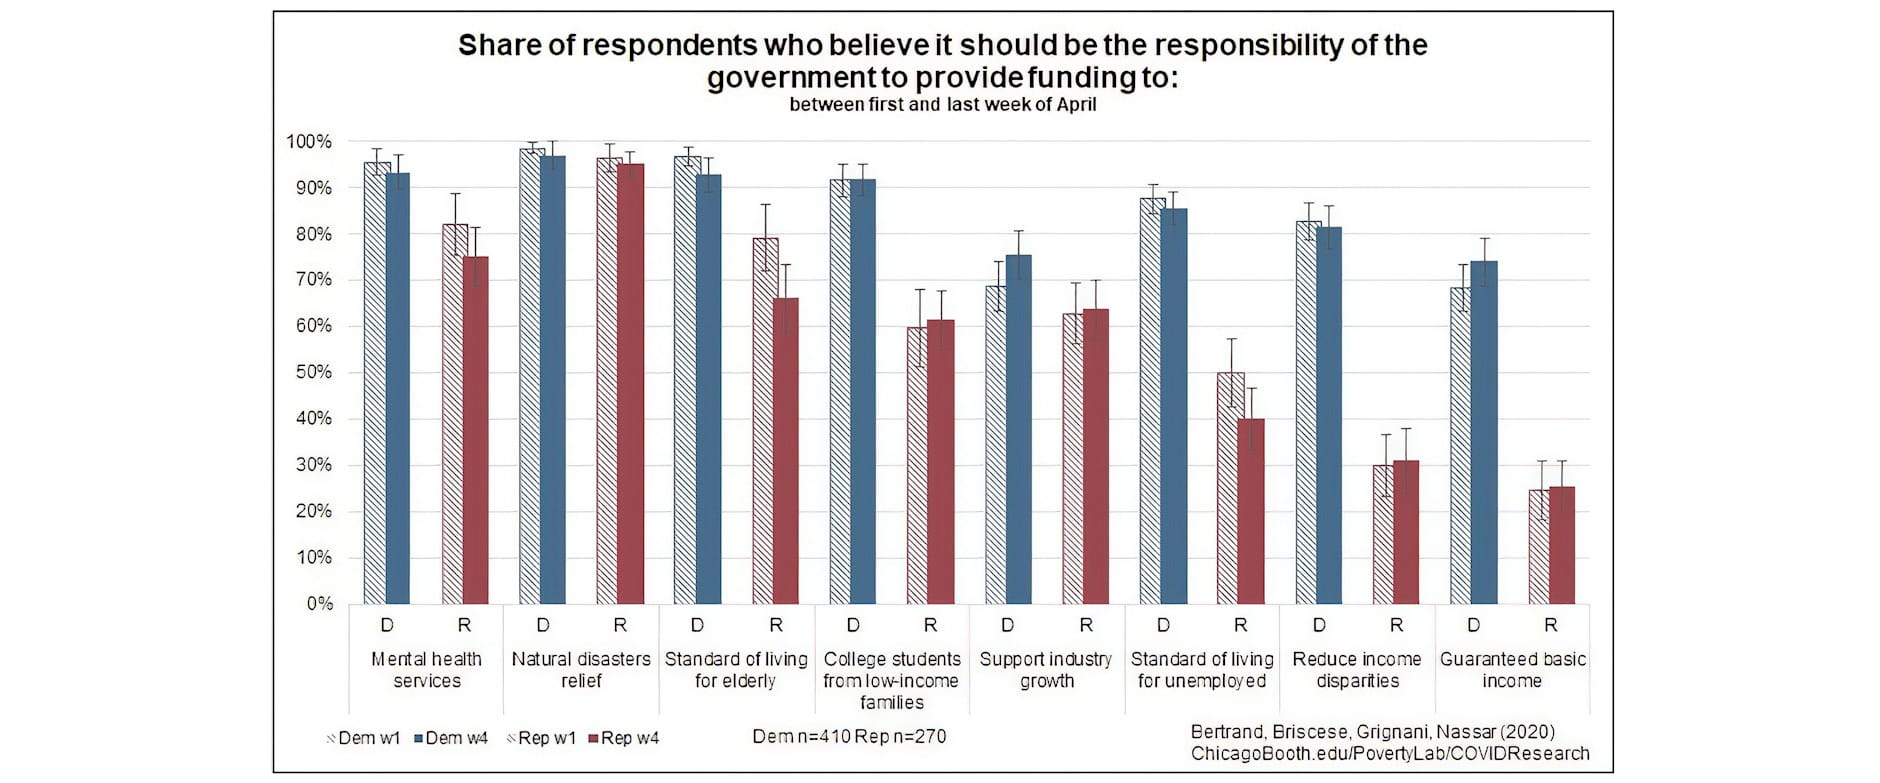 Bar graph showing views on responsibility of the government to fund initiatives